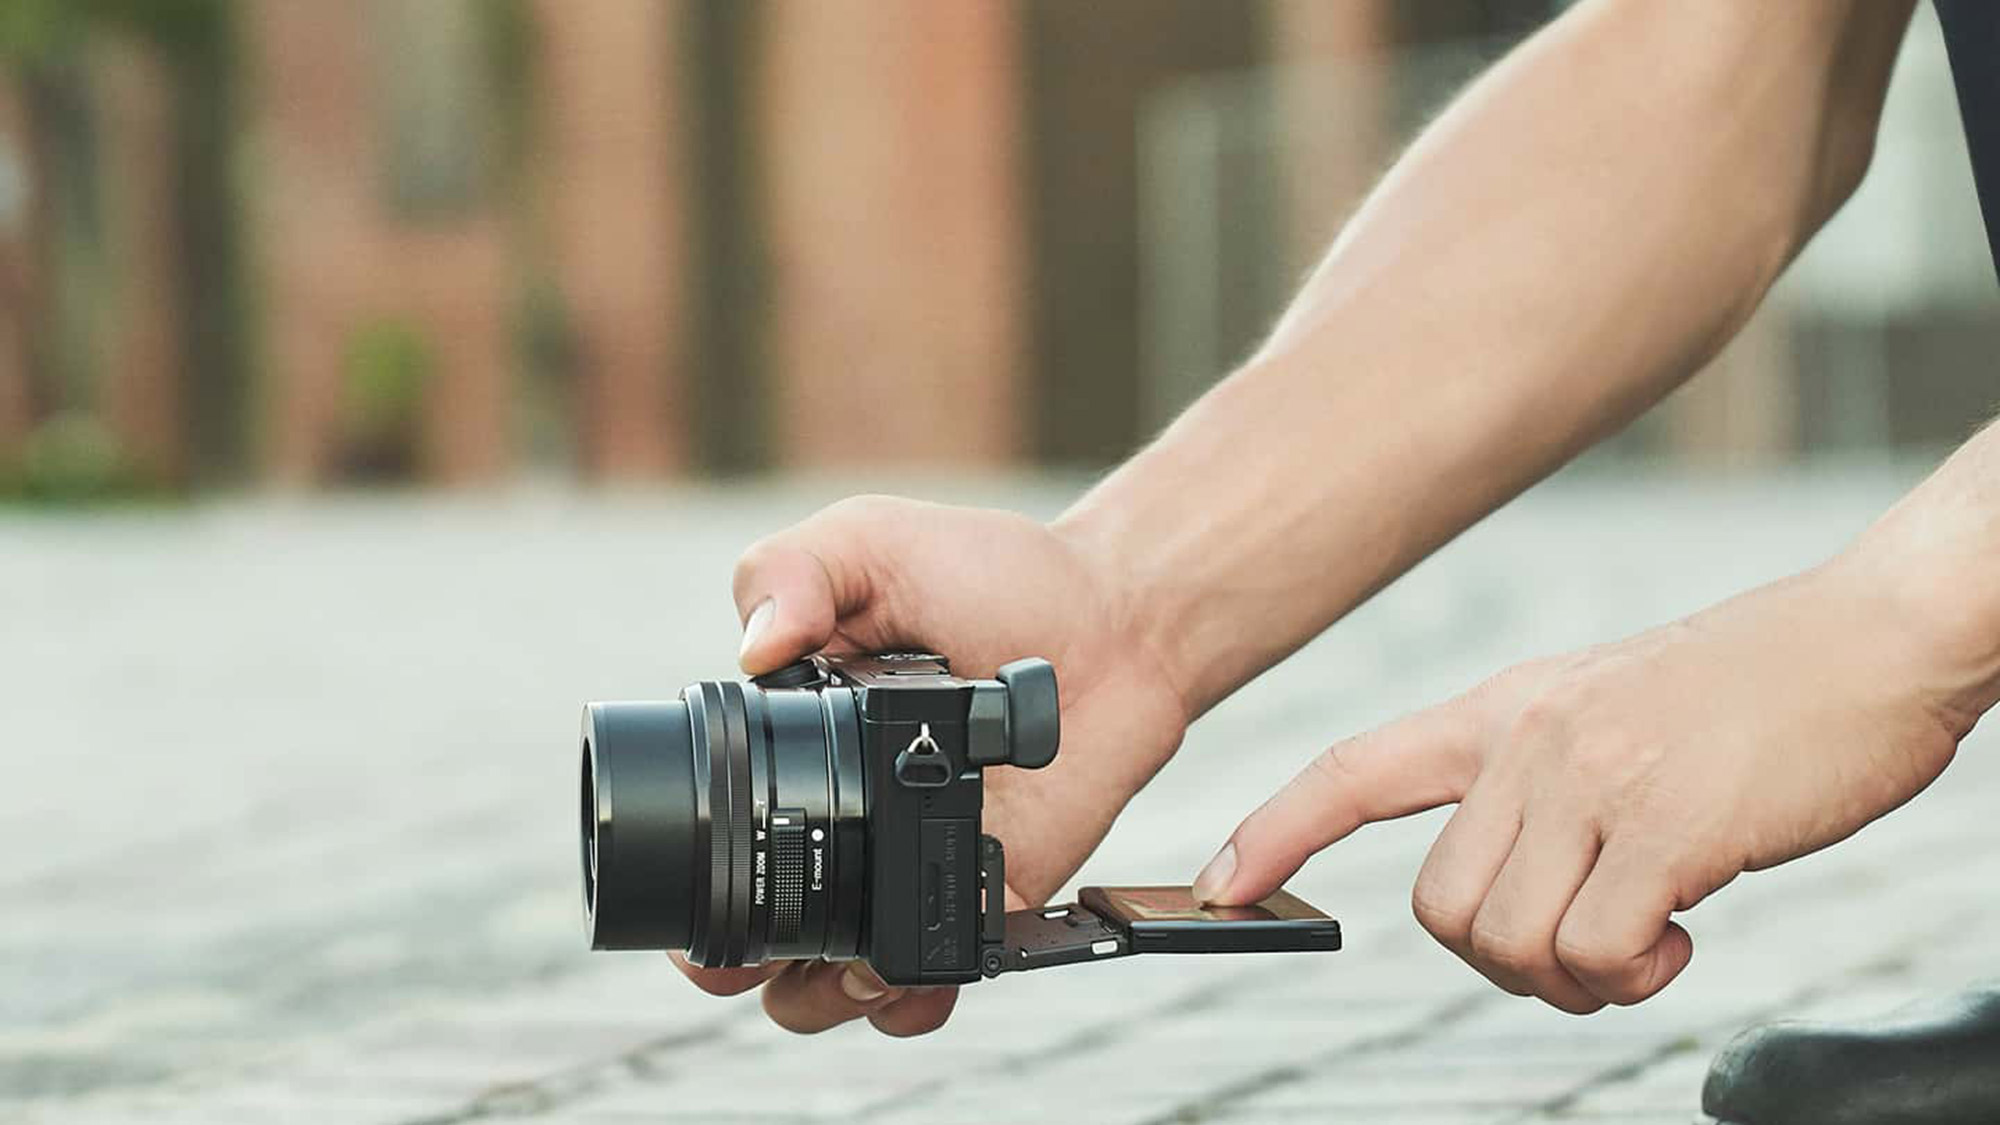 DSLR vs. mirrorless cameras: Size and weight